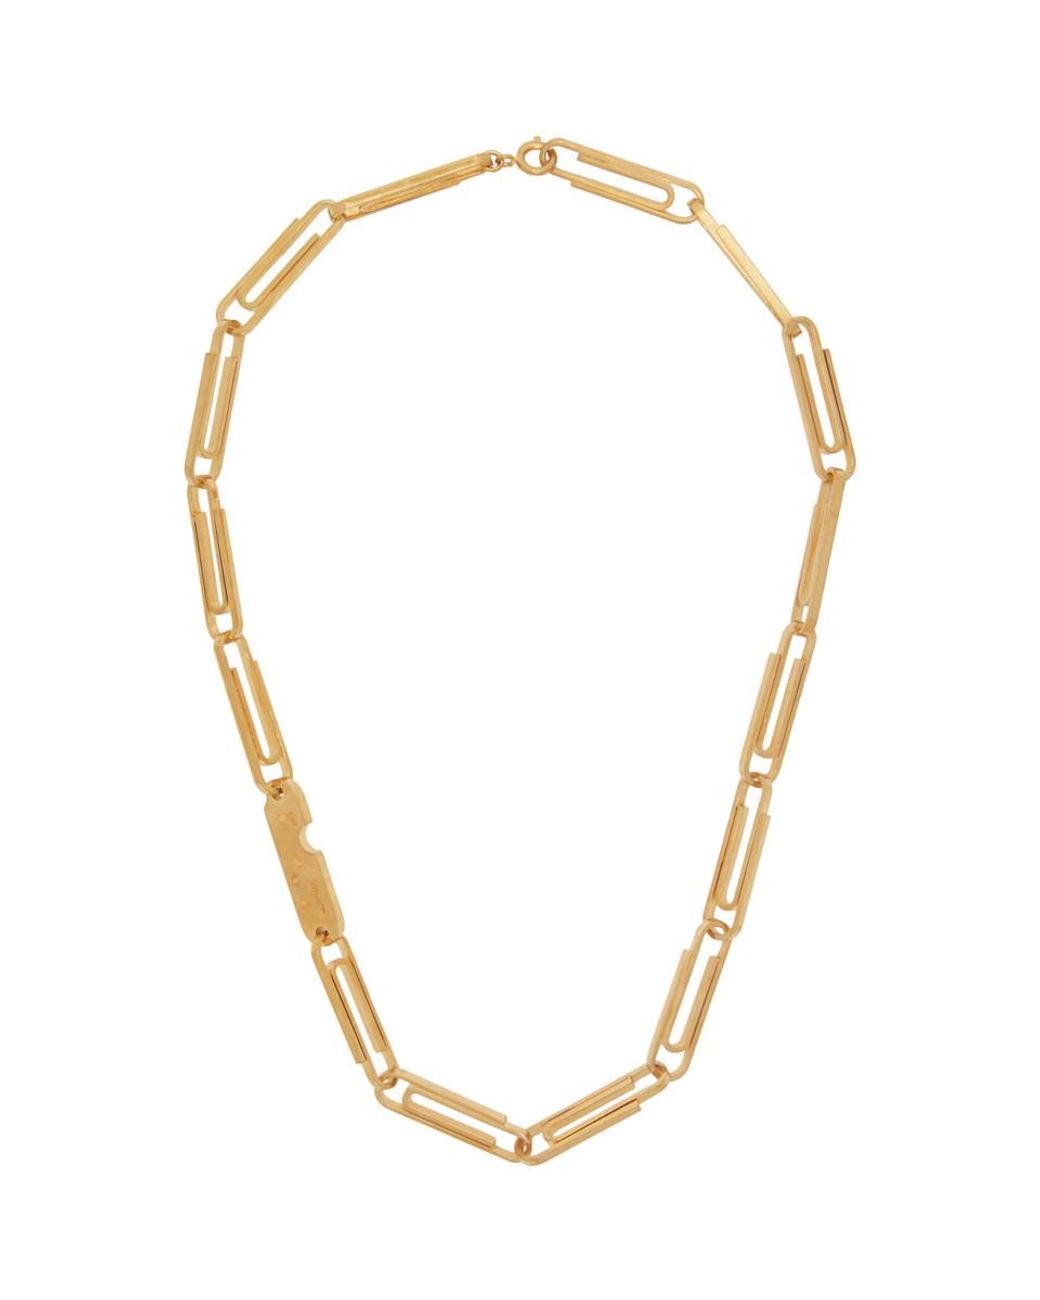 Off-White Texture Paperclip Chain Necklace - Brass Chain, Necklaces -  OFFVA56483